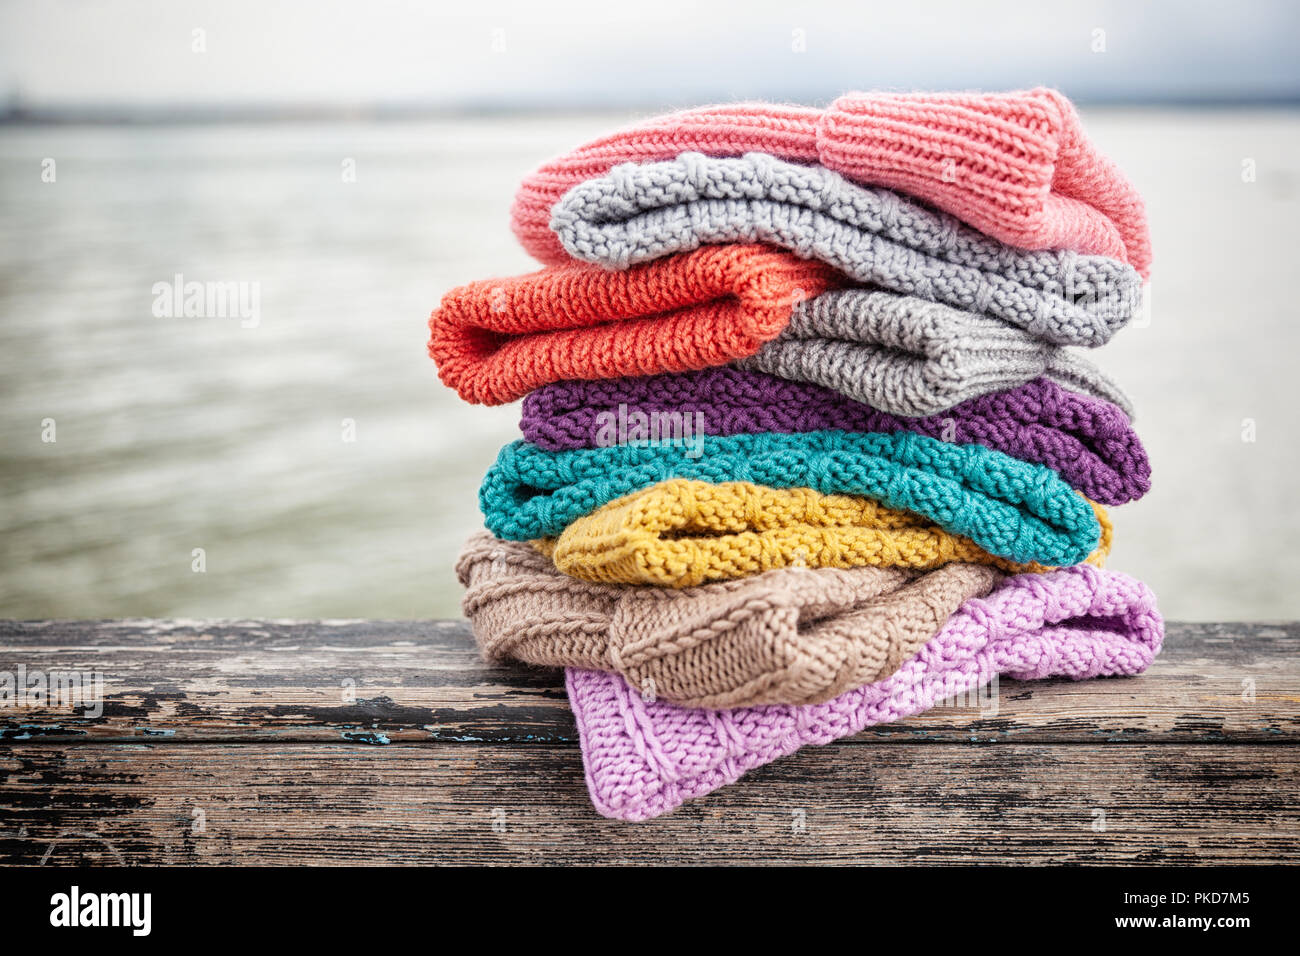 https://c8.alamy.com/comp/PKD7M5/beautiful-background-knitting-winter-blue-and-yellow-a-lot-hat-crochet-hook-handmade-close-up-of-knitted-hats-of-blue-yellow-pink-and-white-PKD7M5.jpg